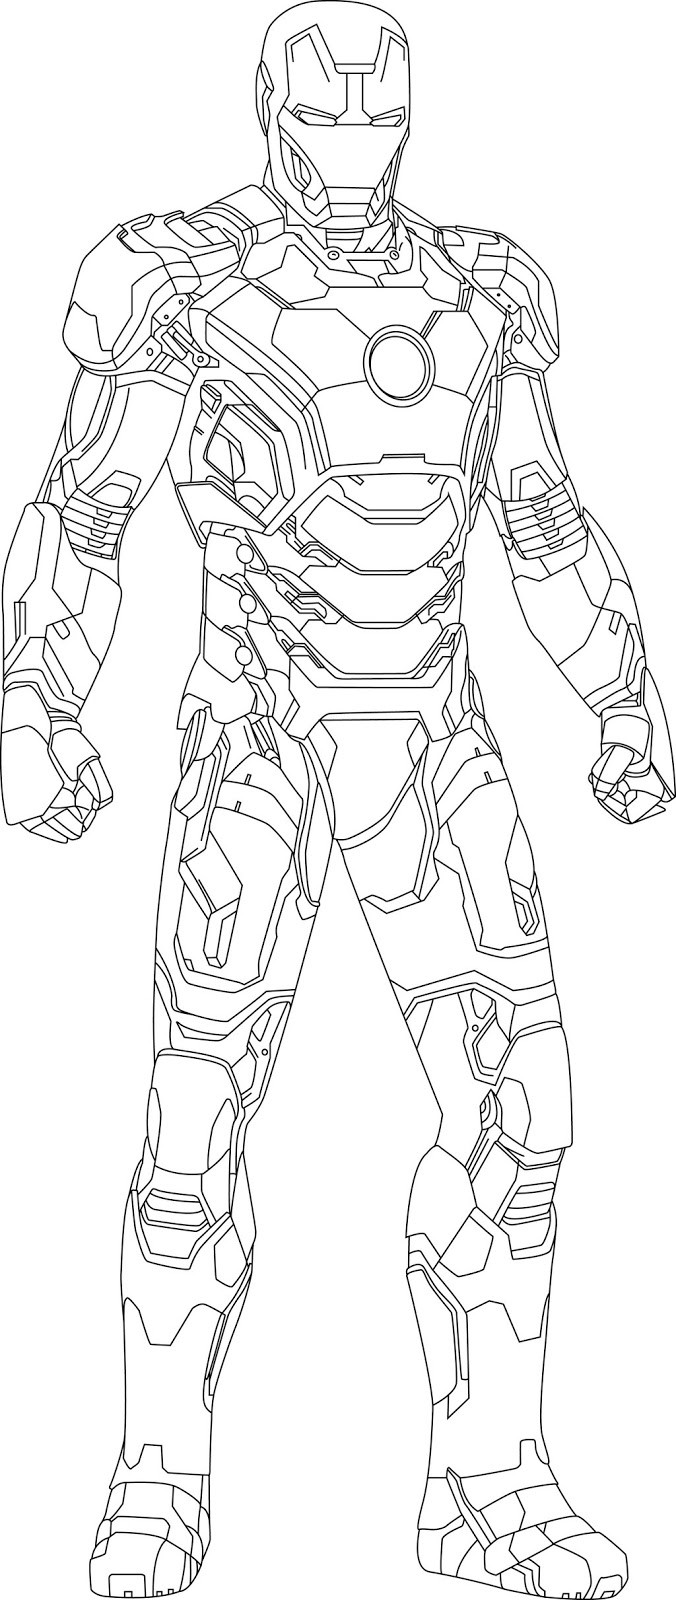 Avengers Printable Coloring Pages
 Coloring pages for kids free images Iron Man Avengers